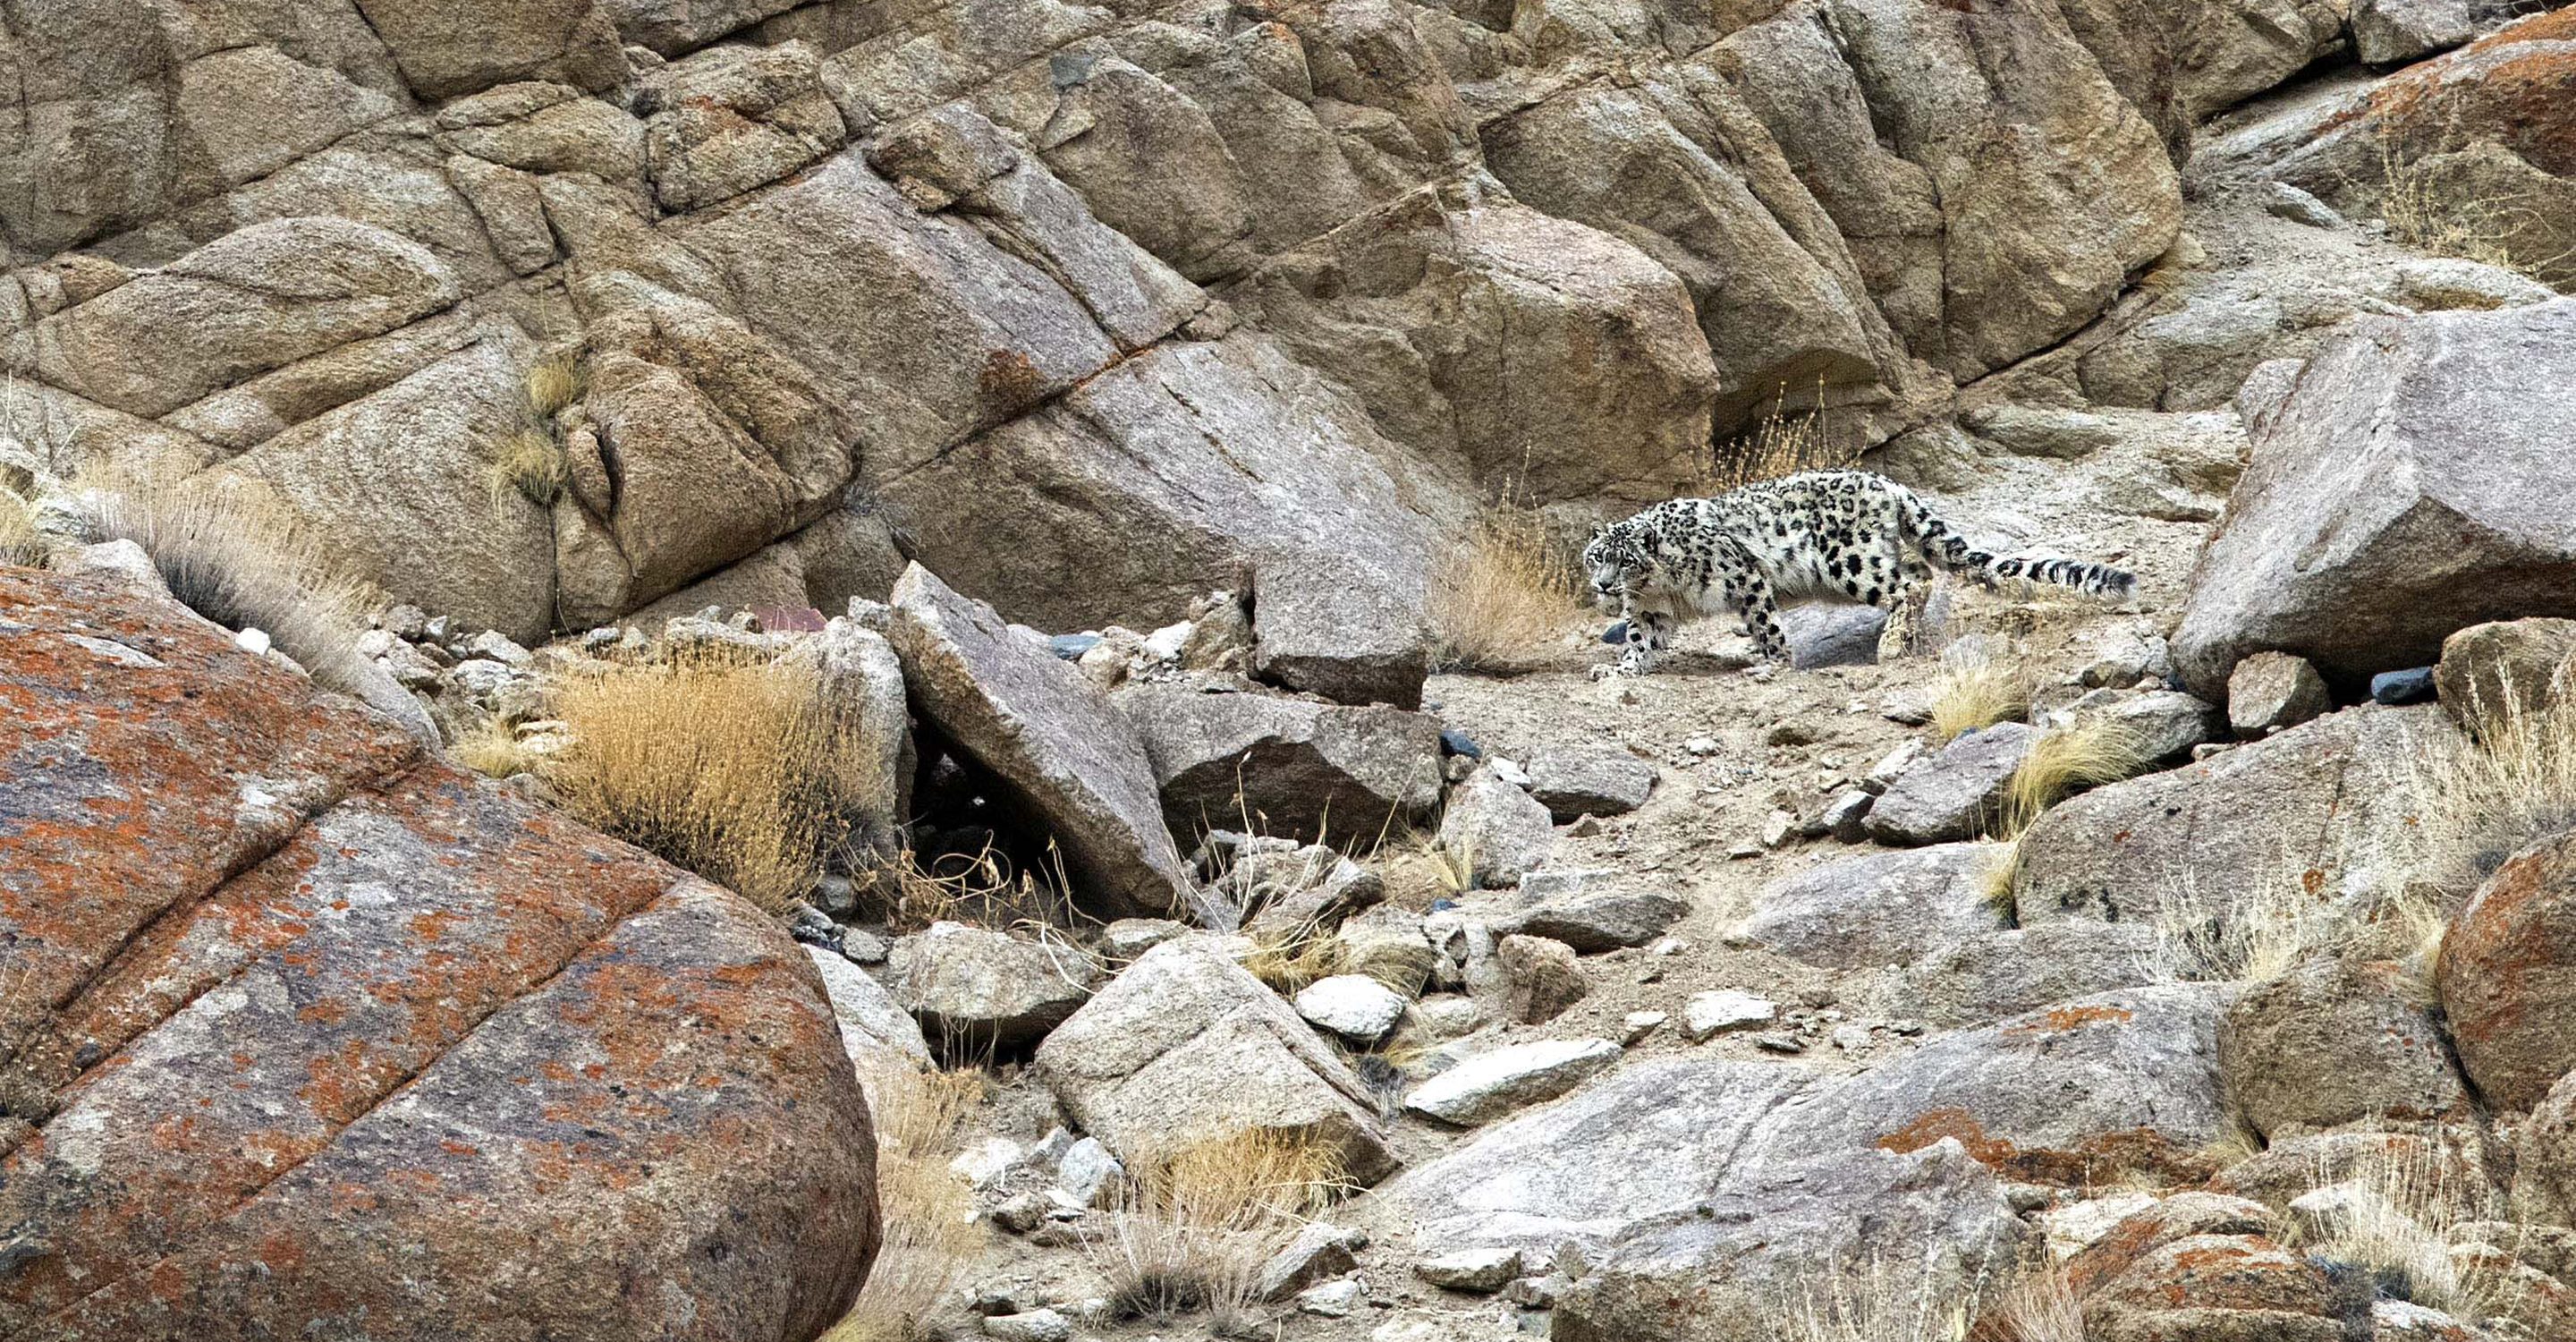 A snow leopard is camouflaged among the rocks of the Himalayas in Ladakh, India